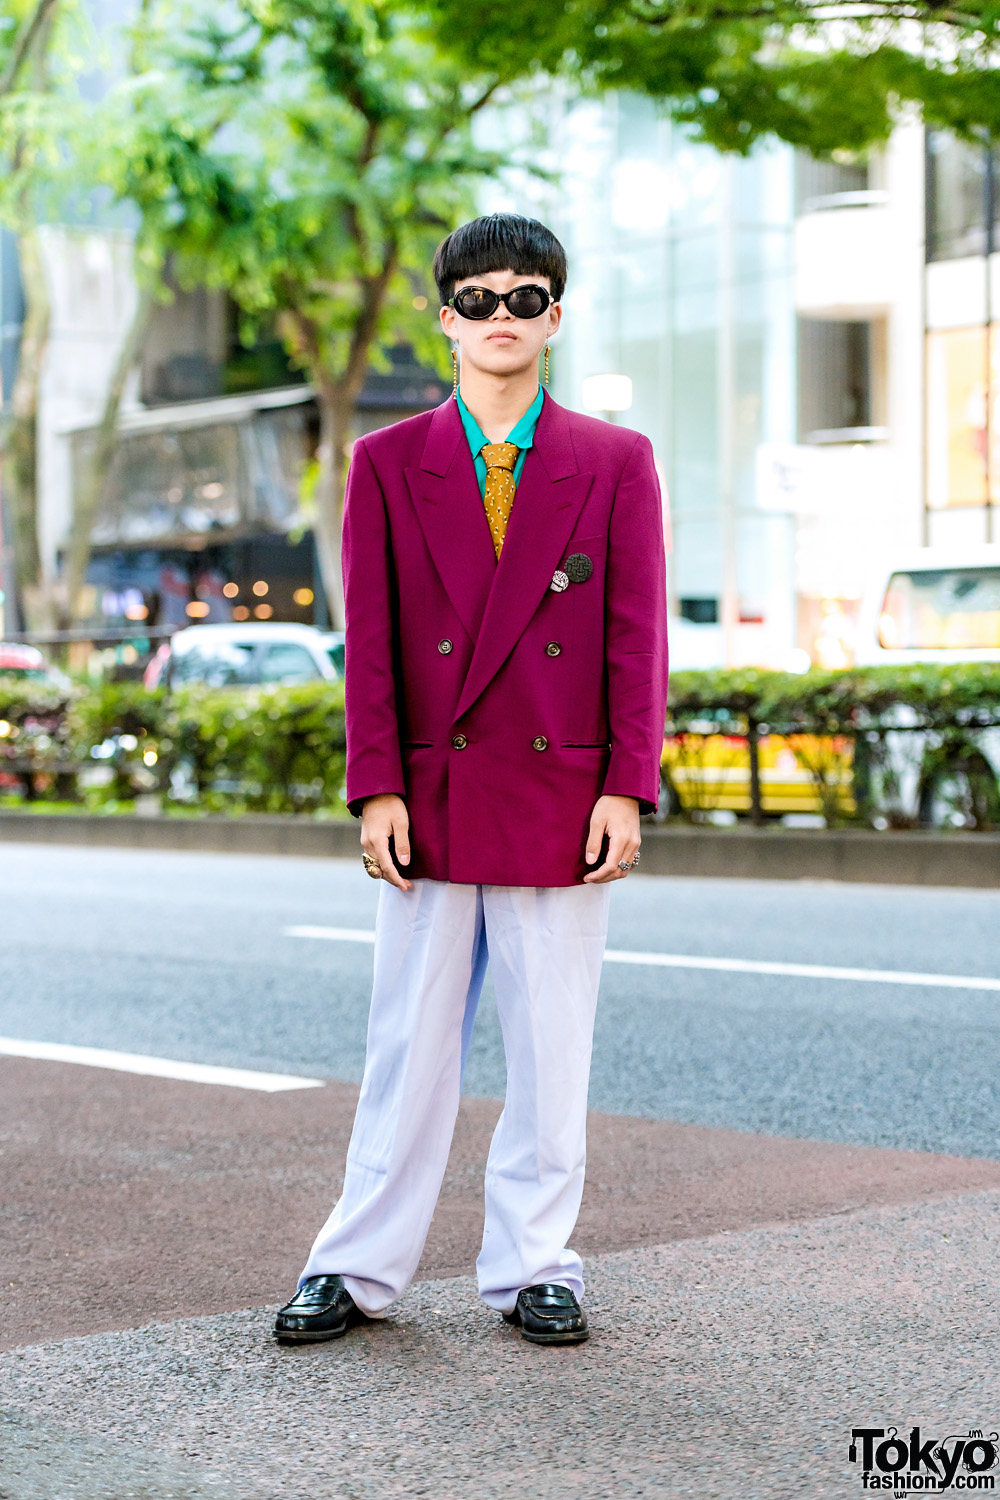 Harajuku Resale Menswear Suit Style w/ Double-Breasted Blazer, Dress Pants, Leather Loafers & Christopher Nemeth Badges